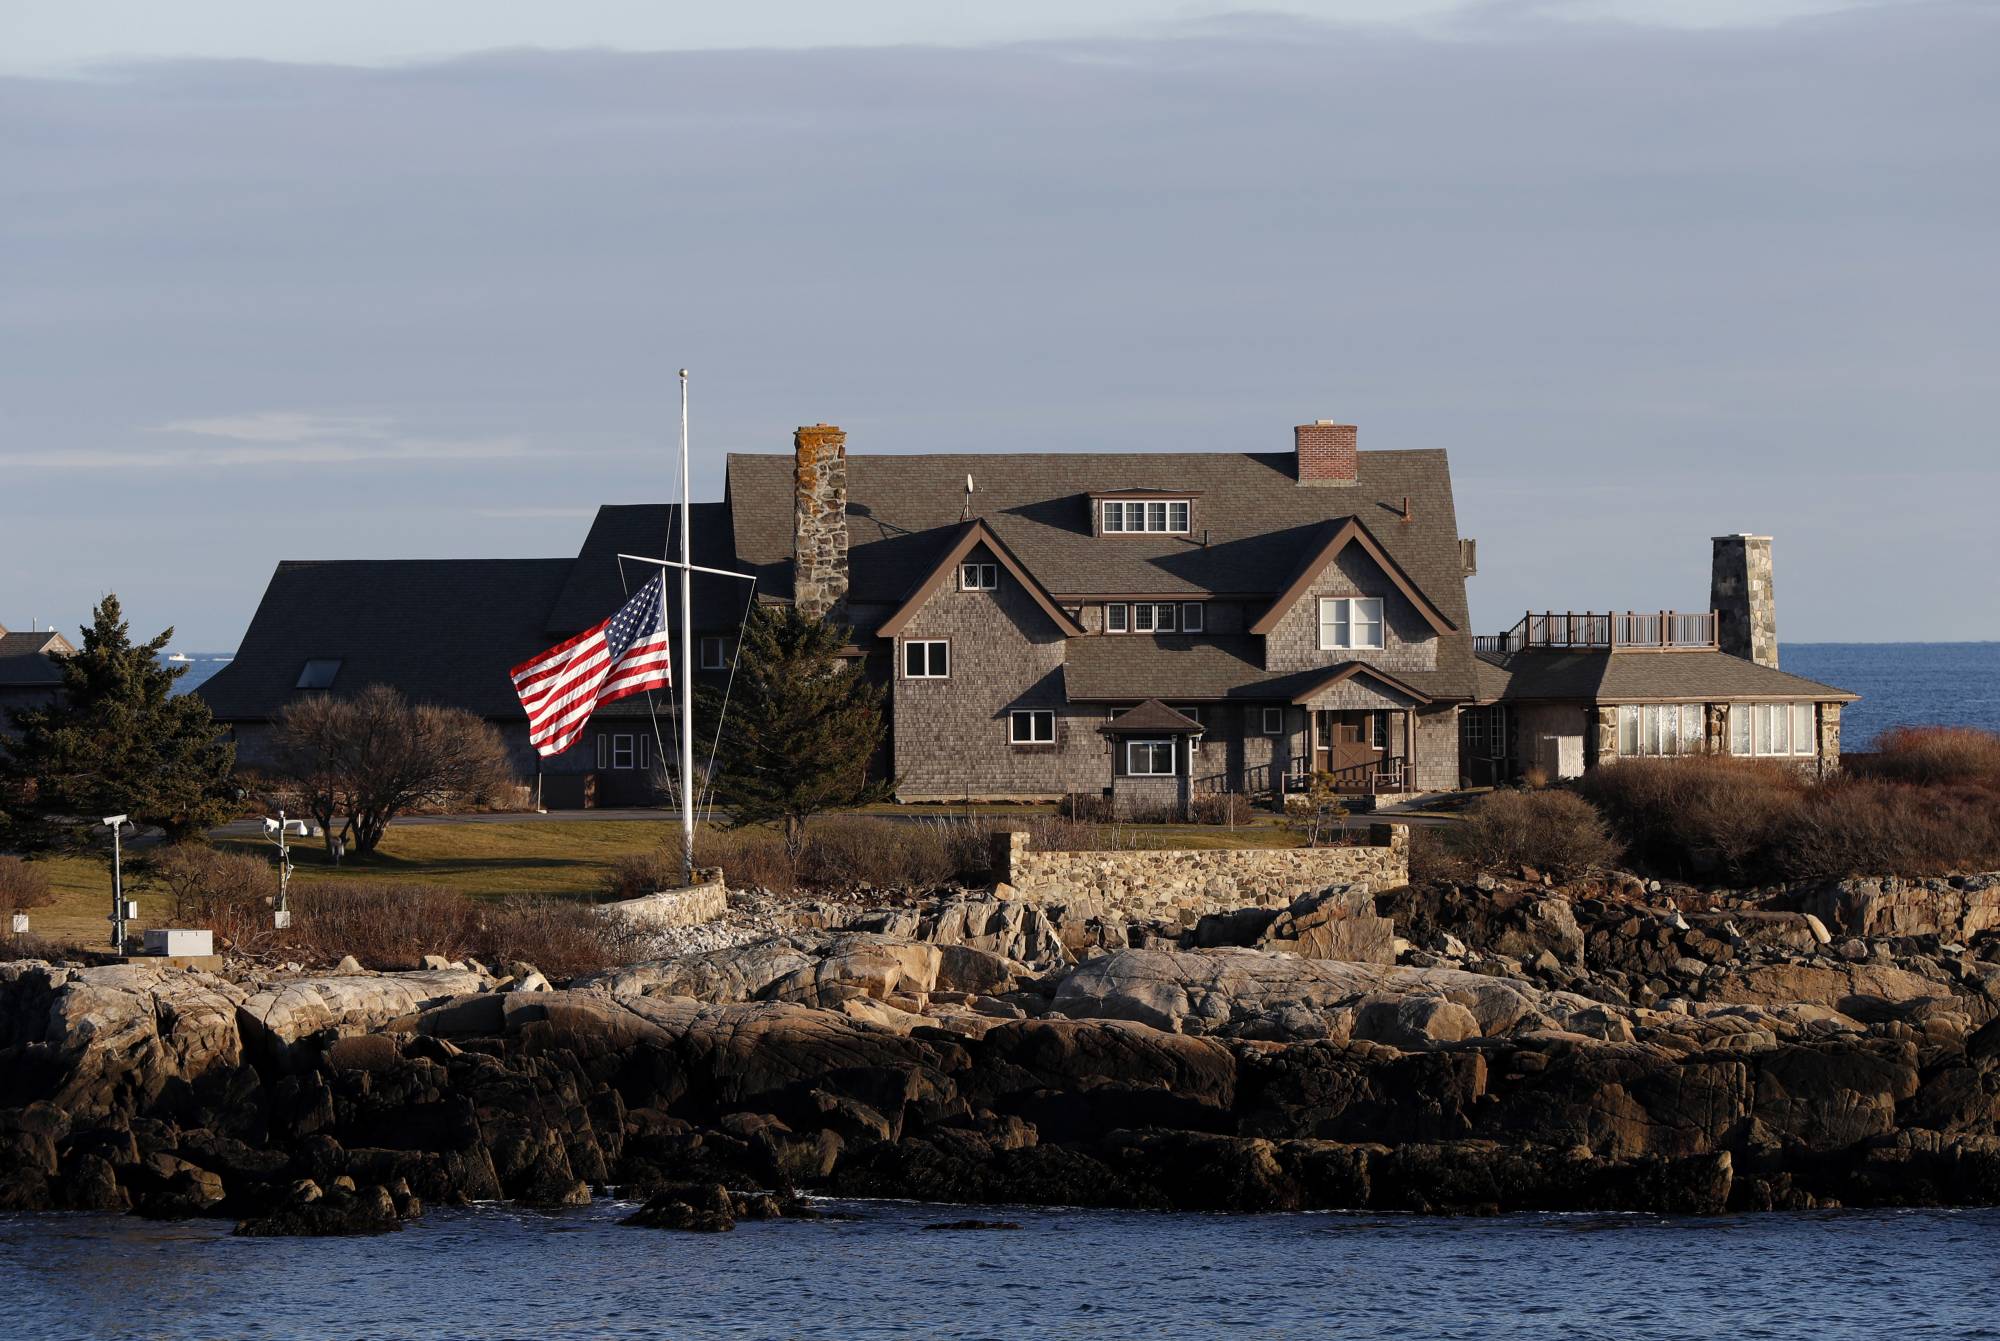 The American flag flies at half-staff in honor of President George H. W. Bush at Walker's Point, the Bush's summer home, Saturday, Dec. 1, 2018, in Kennebunkport, Maine. Bush died at the age of 94 on Friday, about eight months after the death of his wife, Barbara Bush. (AP Photo/Robert F. Bukaty)